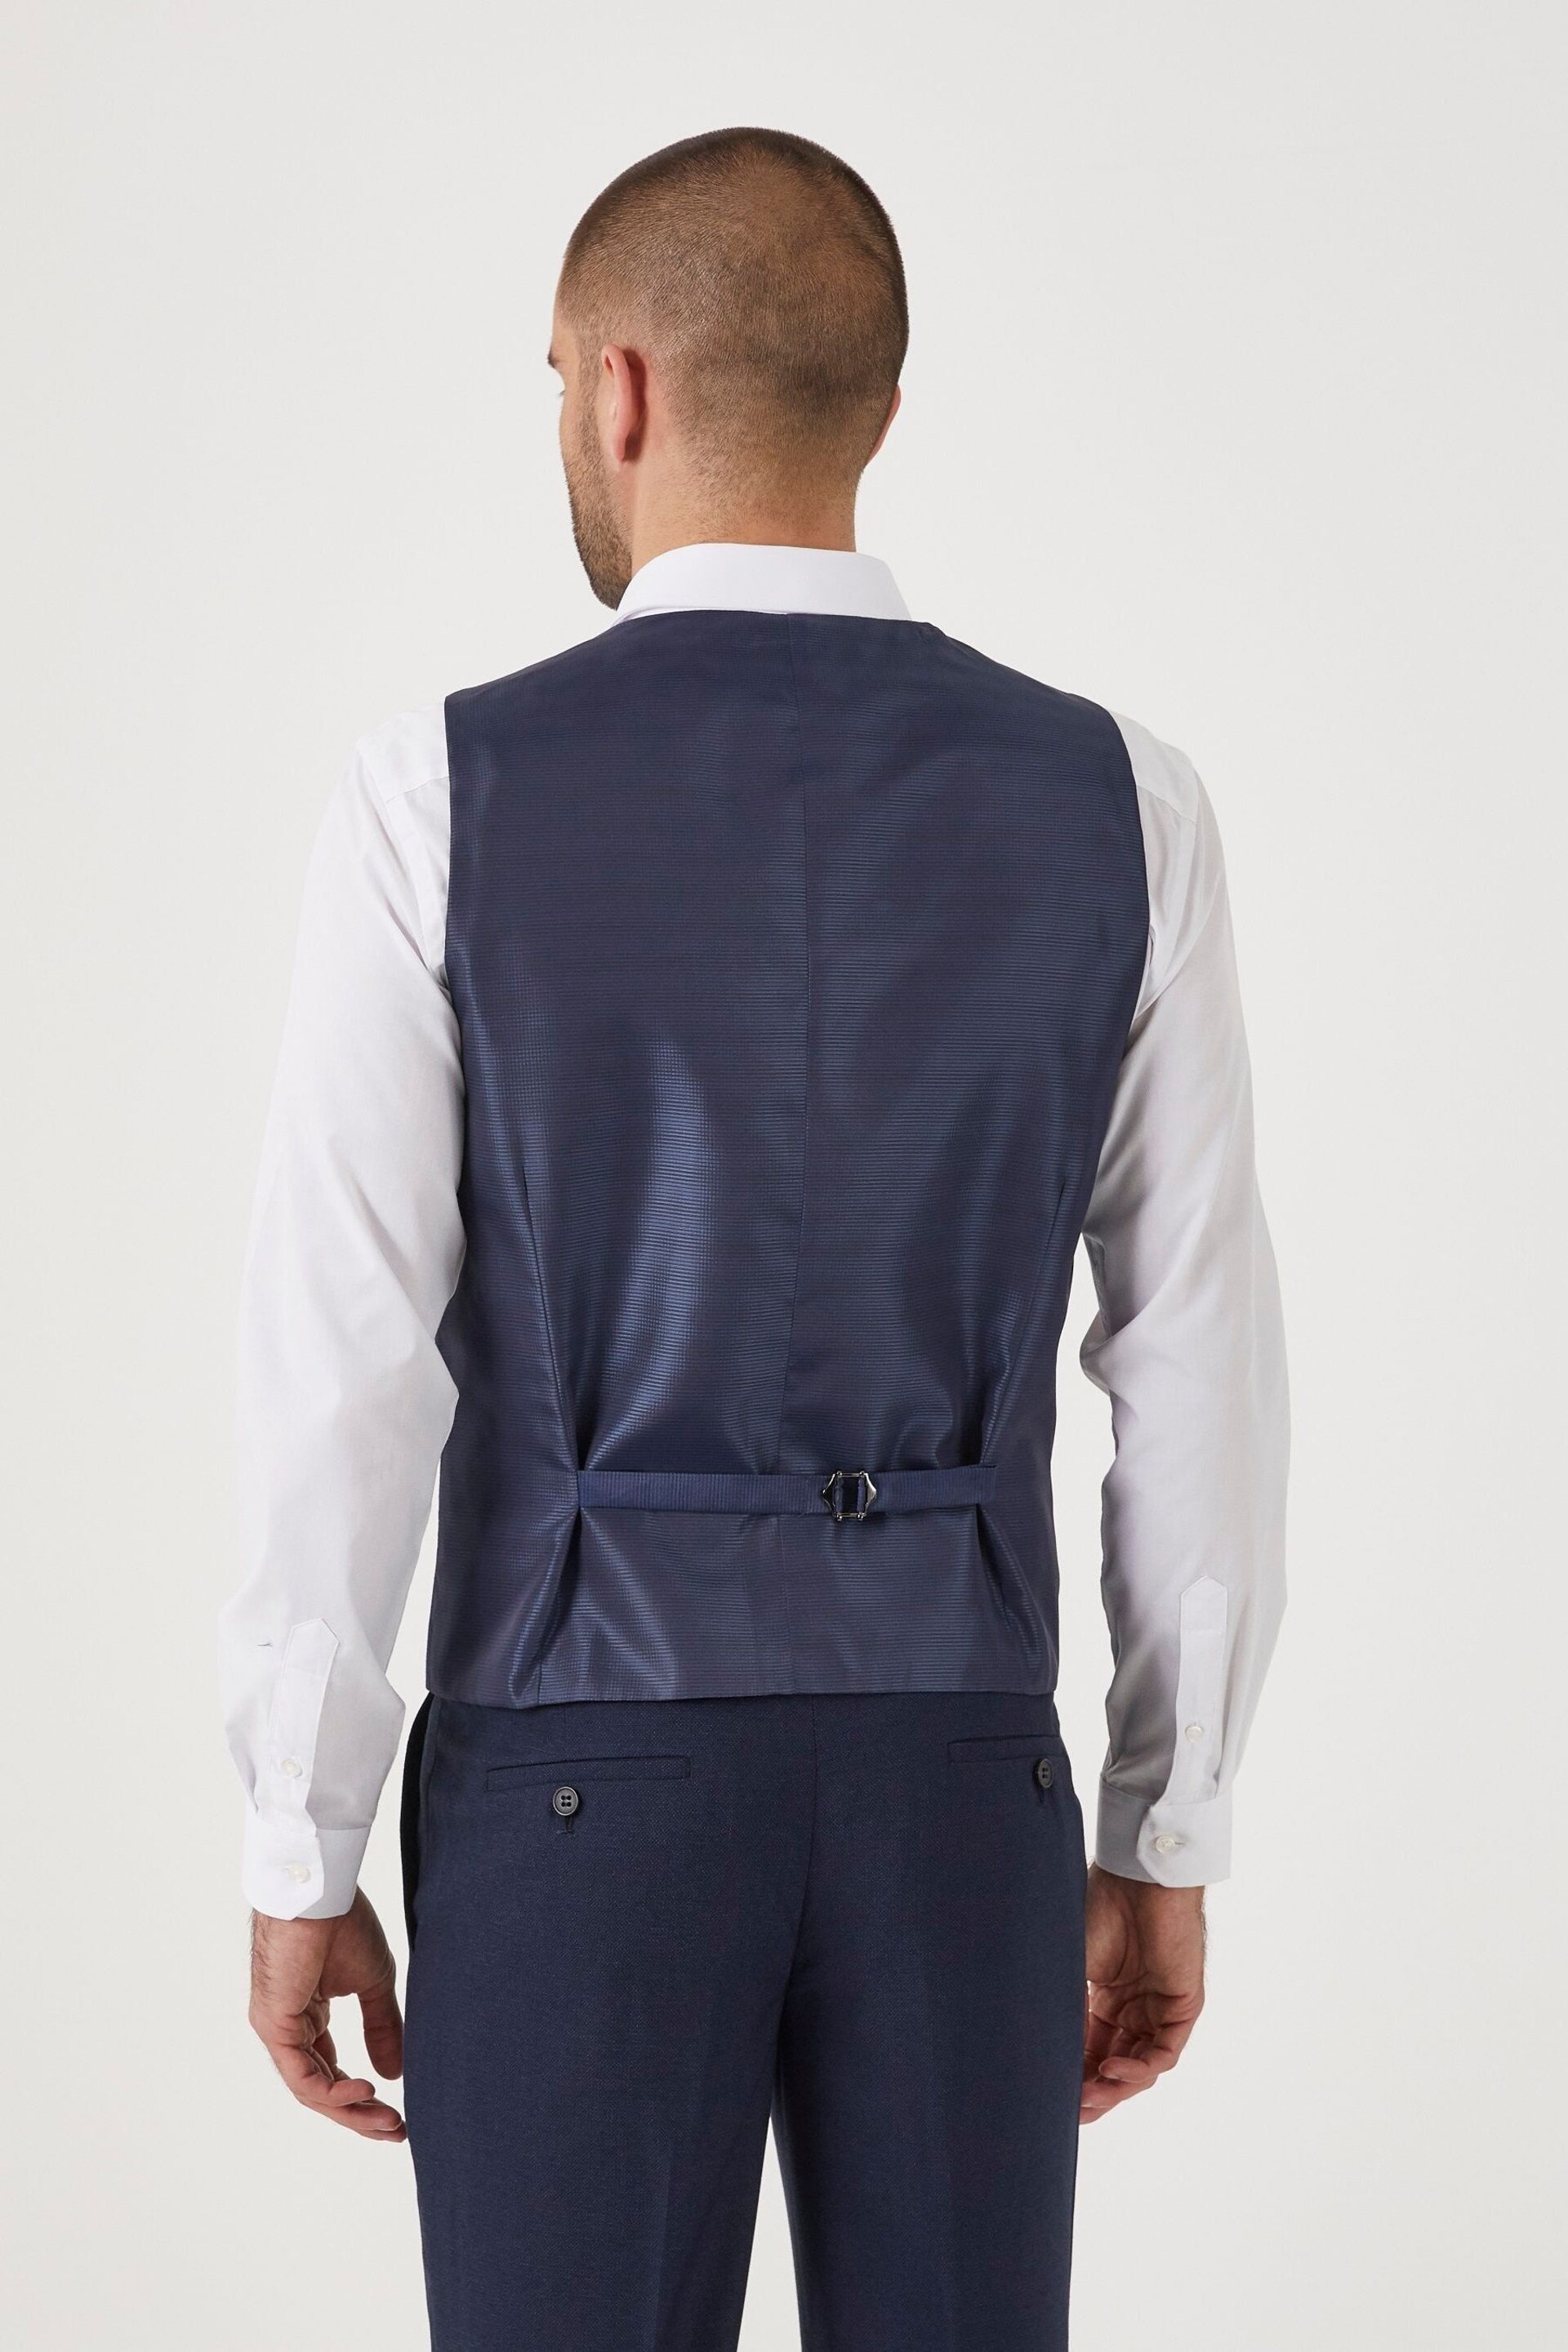 Skopes Harcourt Double Breasted Suit Waistcoat - Image 3 of 5